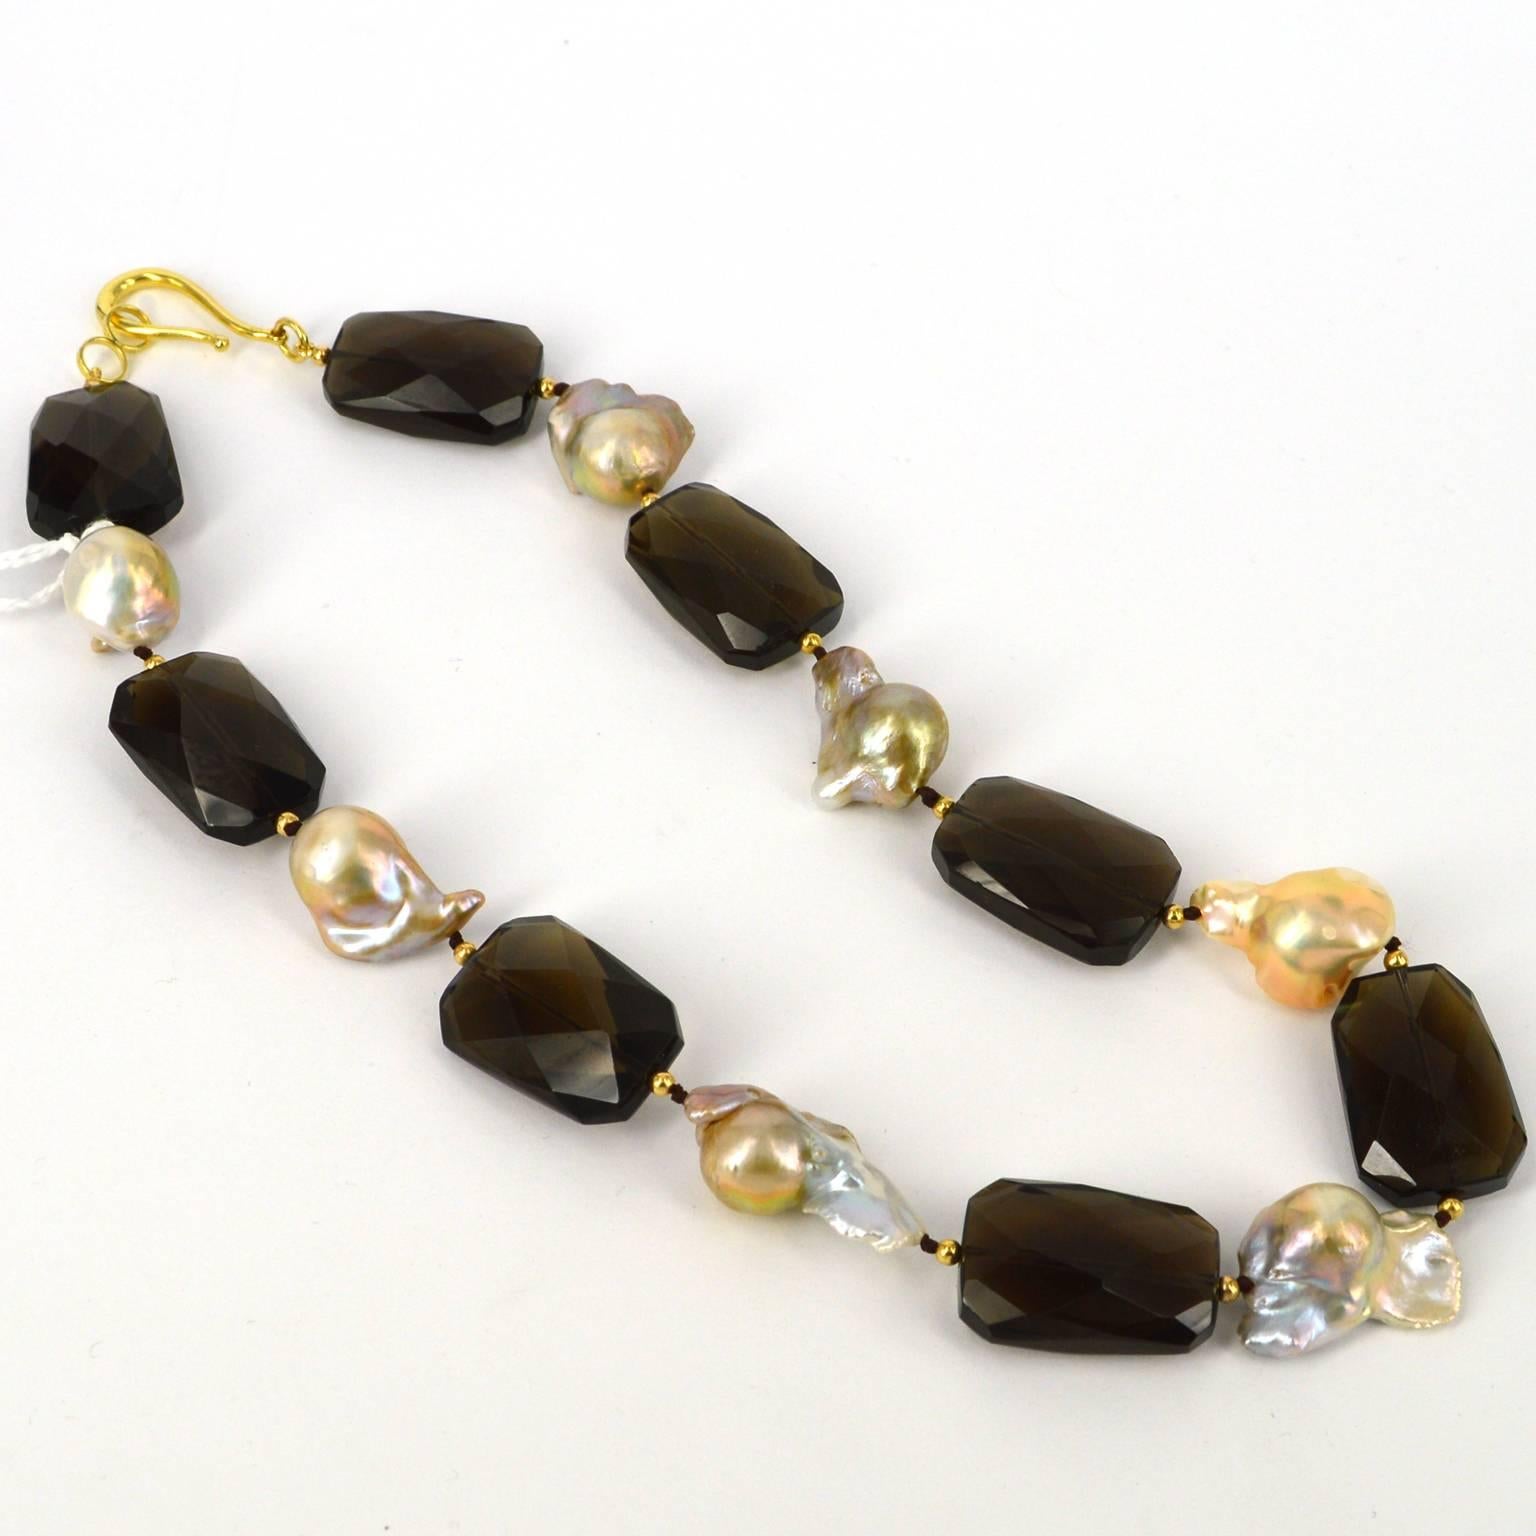 28x18mm unusual shaped faceted Smokey Quartz and naturally Pink Baroque 20mm+ Fresh Water Pearls with 3mm 14k Gold Filled Beads and a easy to use 29mm Gold Plate Sterling Silver hook Clasp. Finished necklace measures 50cm.

All stones and pearls are